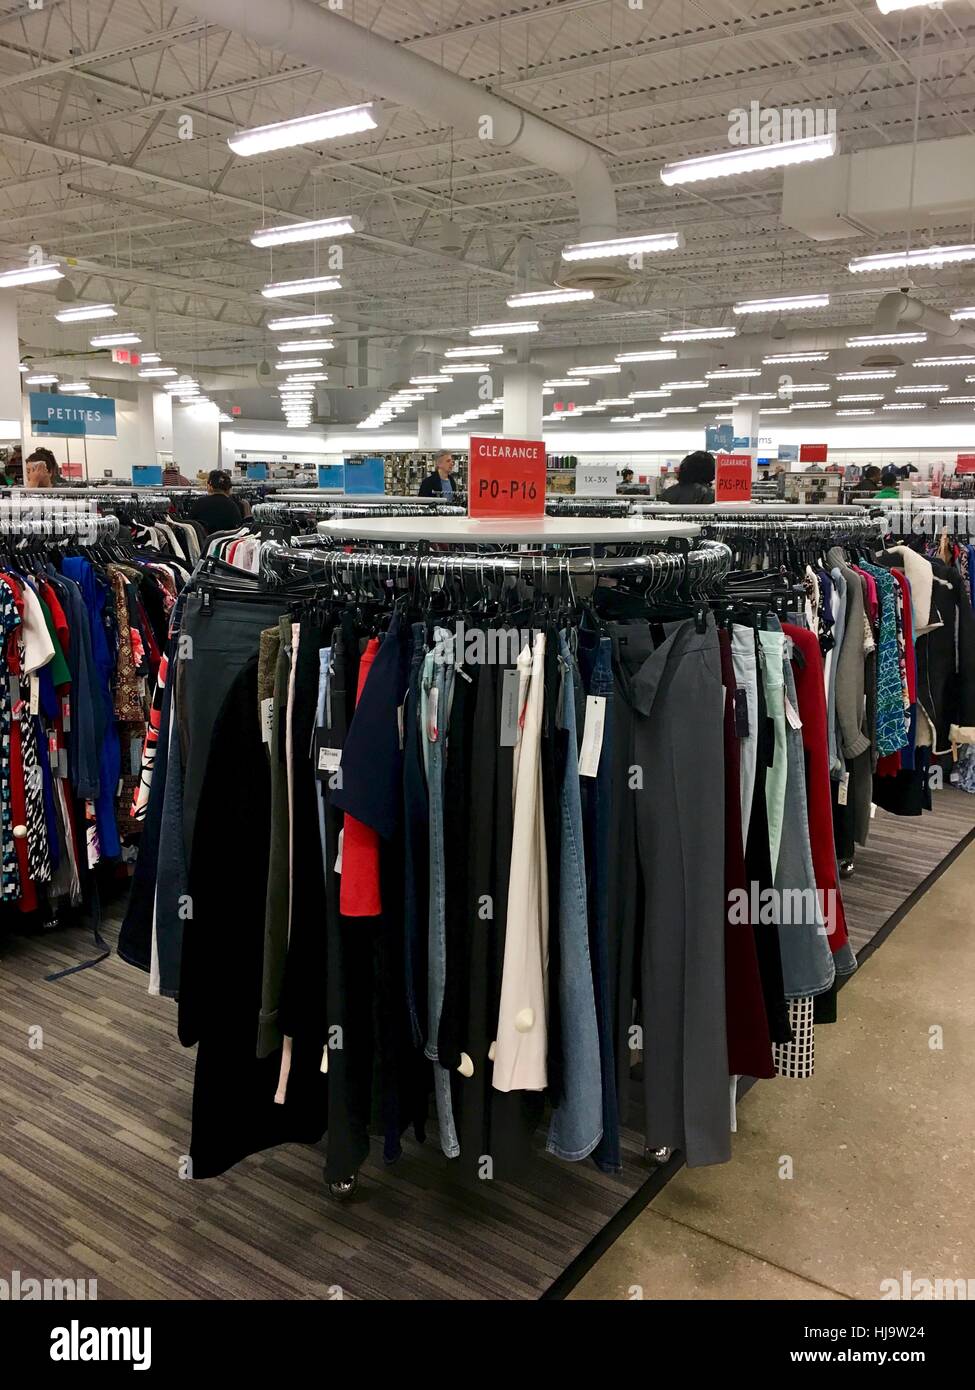 996 Nordstrom Rack Stock Photos, High-Res Pictures, and Images